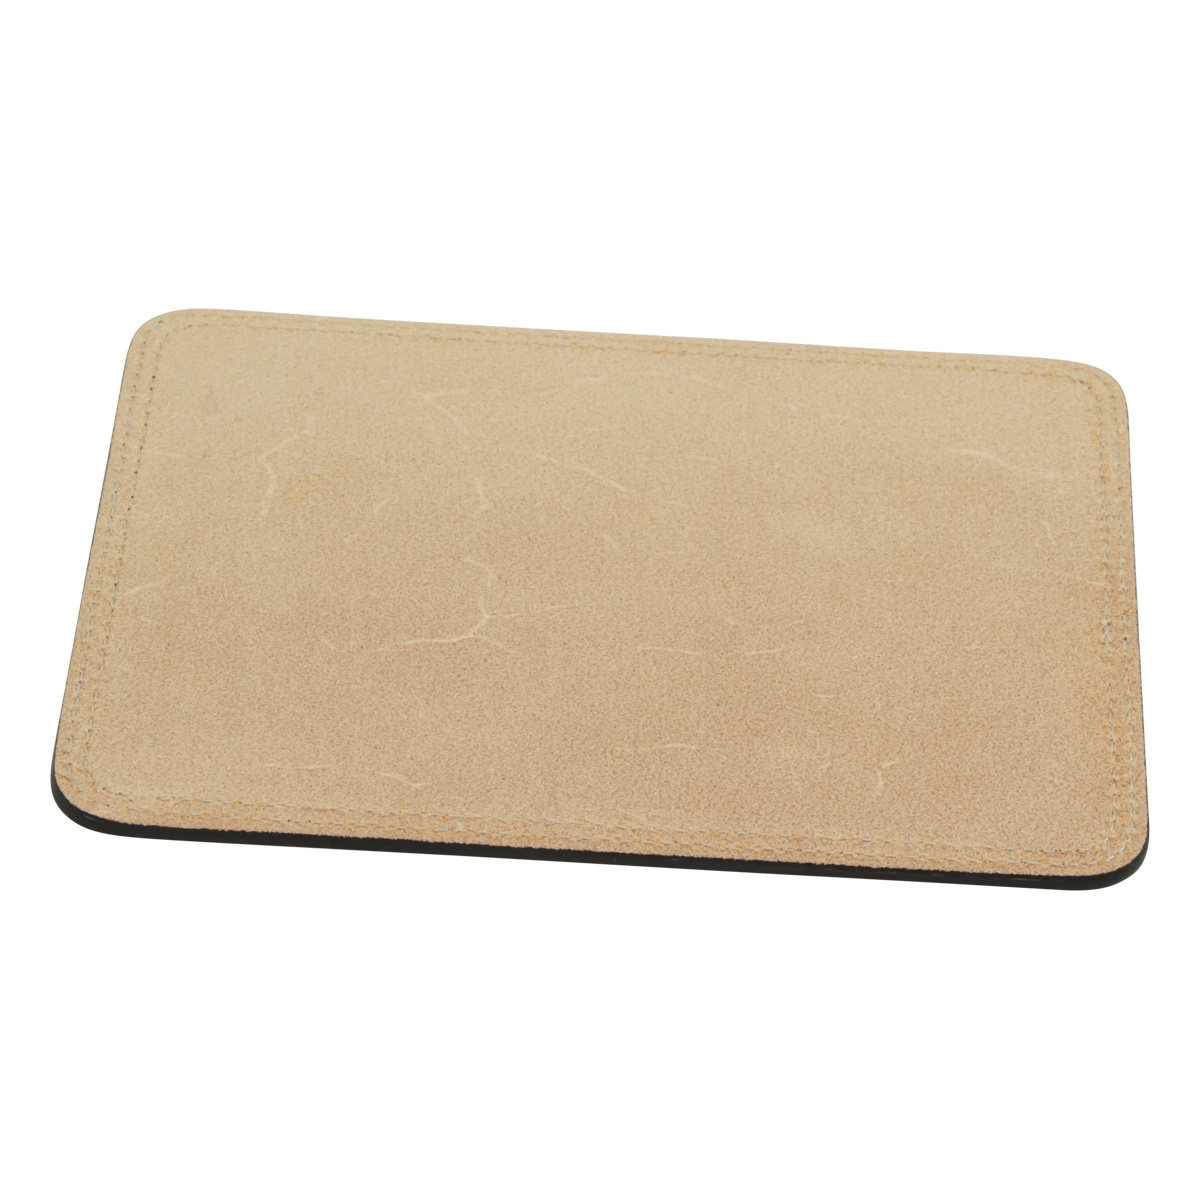 Leather mouse pad - green | 761089VE US | Old Angler Firenze